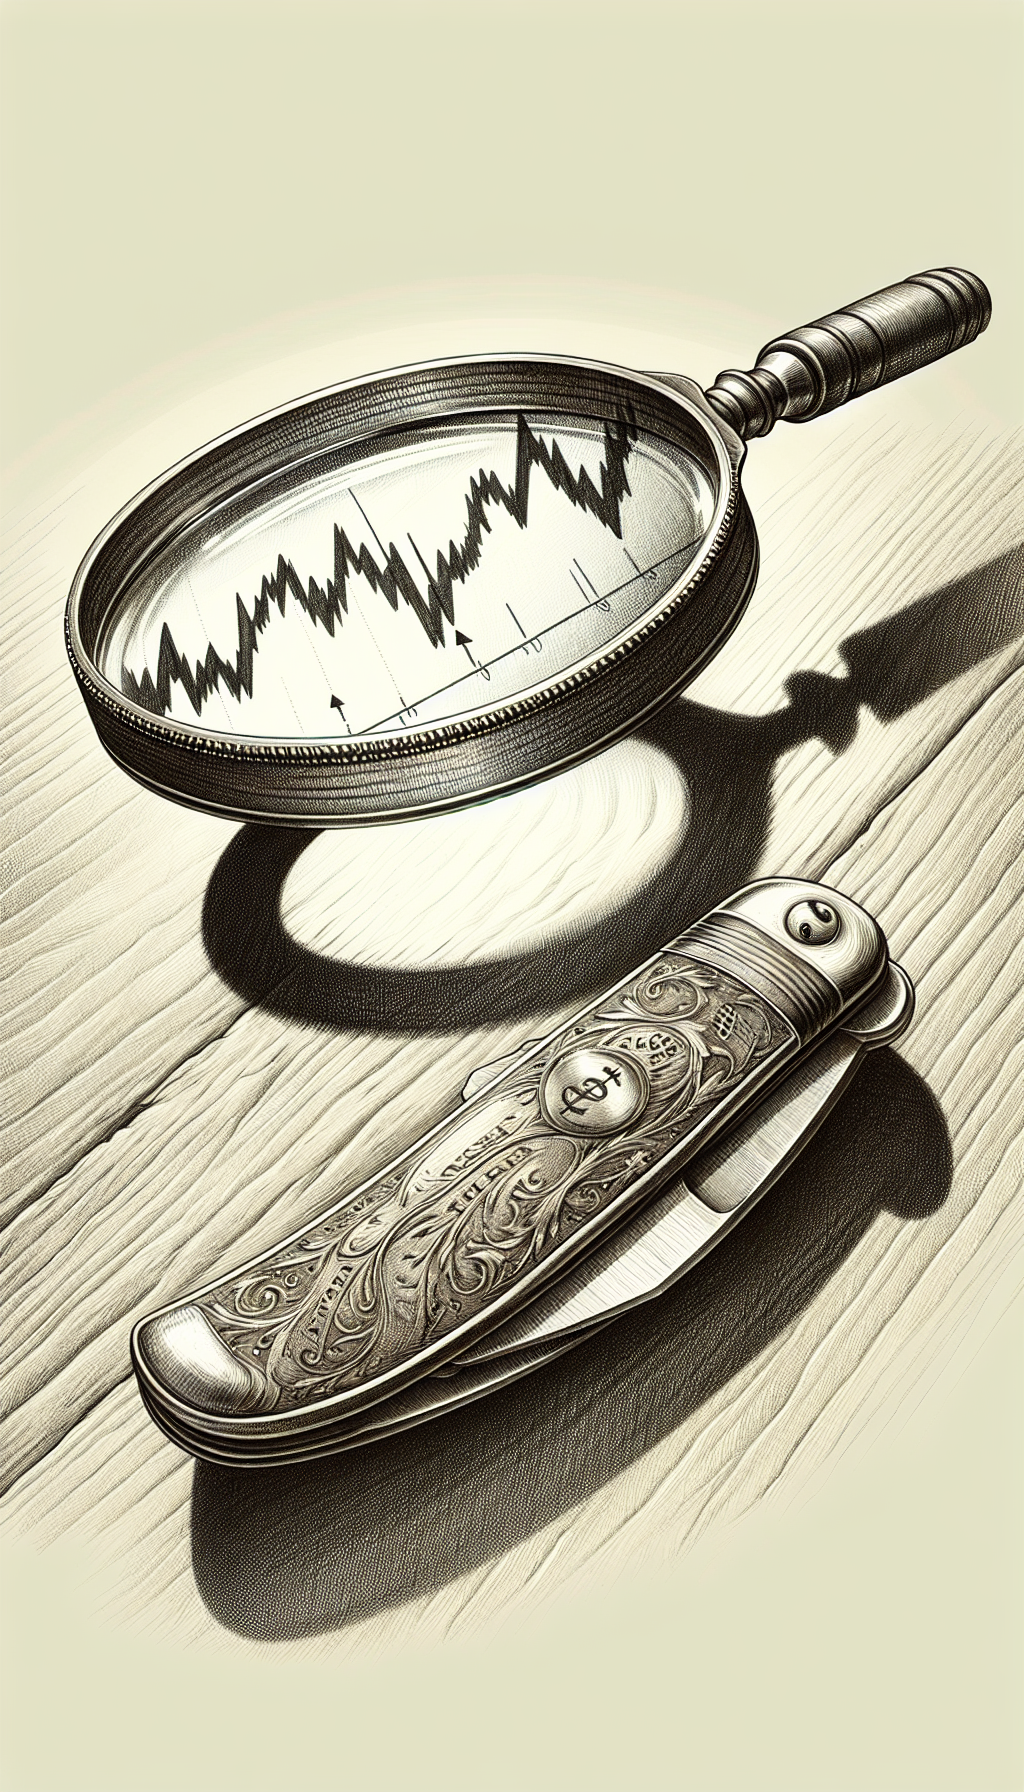 An intricately lined sketch showcases an antique magnifying glass hovering over a vintage old timer knife, casting a shadow of a fluctuating stock market graph on a wood-grained table, symbolizing appraisal insights. The knife handle is engraved with years, indicating its age, and subtle dollar signs shimmer along the blade edge, articulating its collectible value through diverse line weights and hatching techniques.